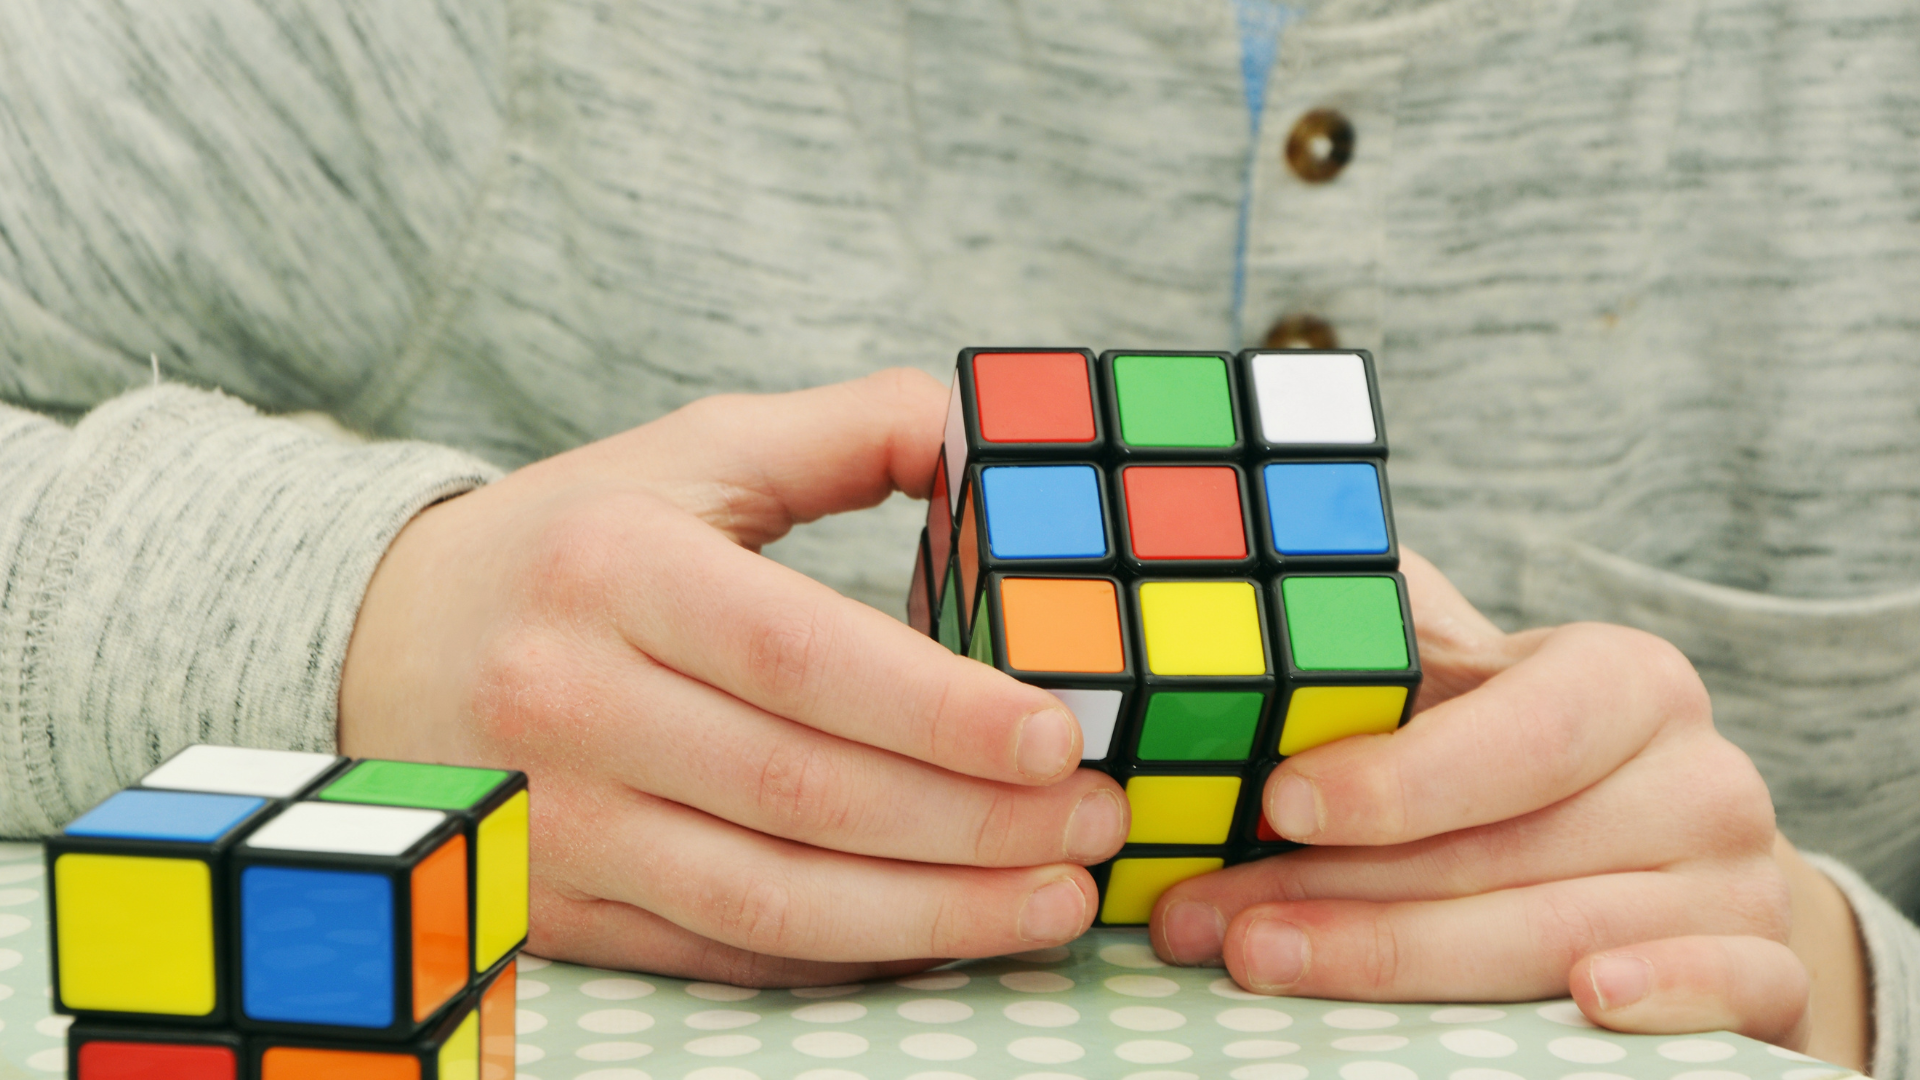 The inventor of the Rubik's Cube offers advice for solving it, and says 'don't fear the complexity...